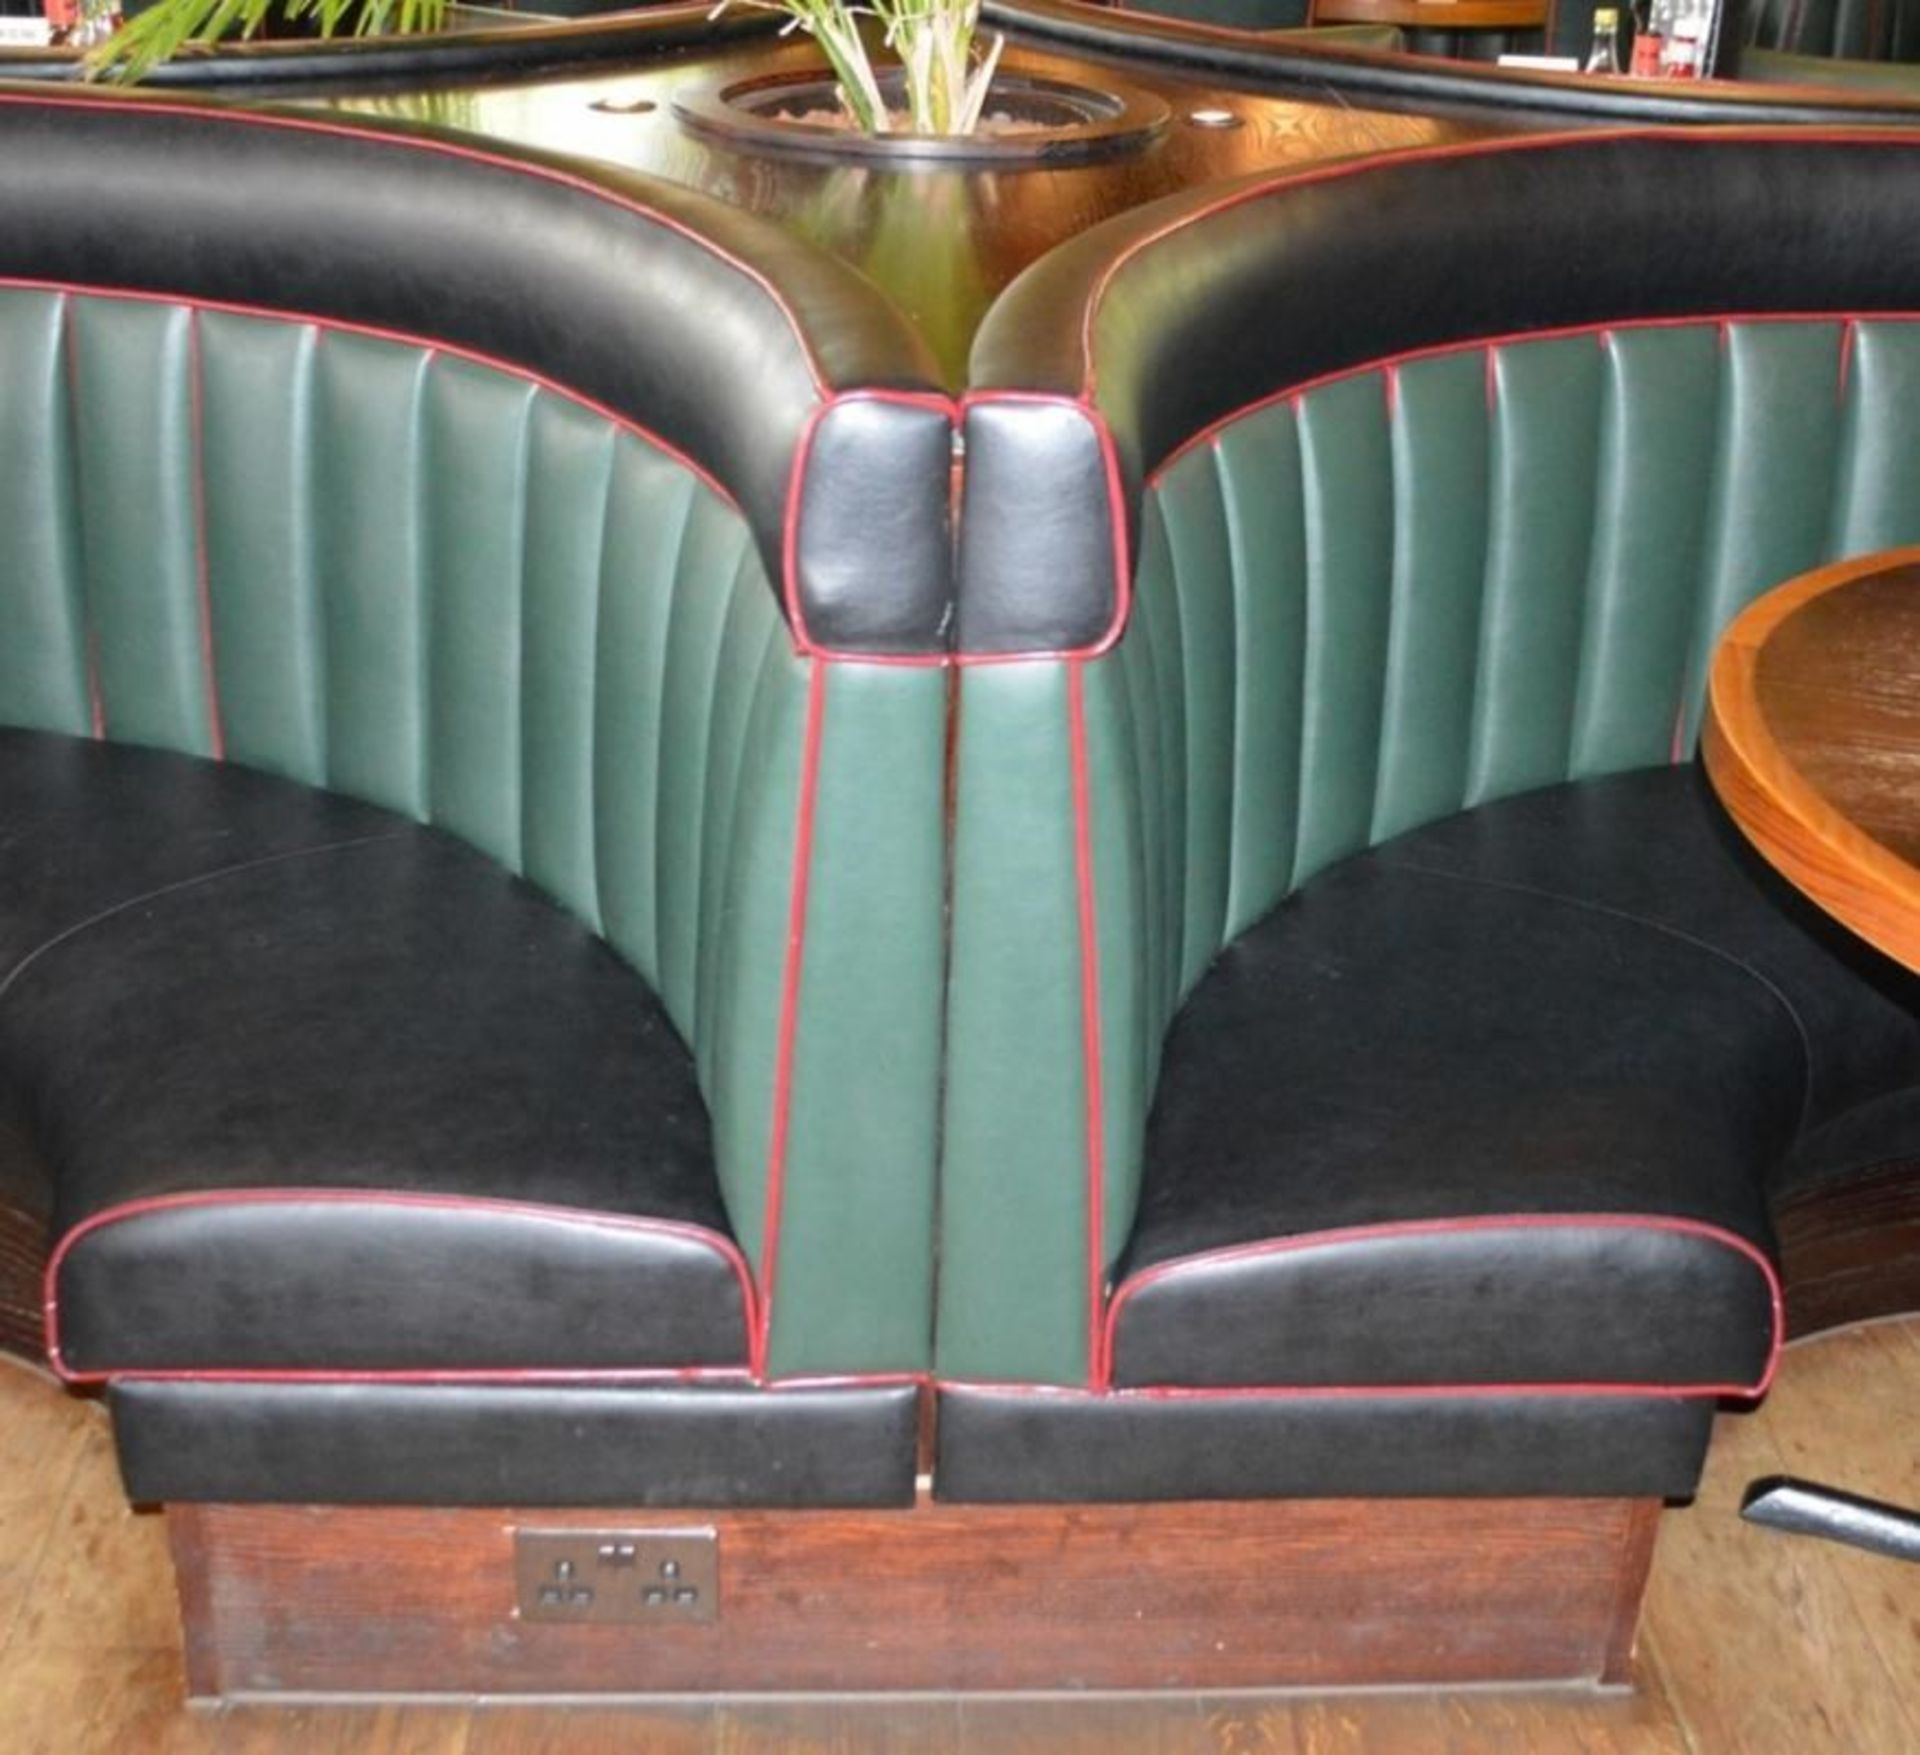 1 x Contemporary Half Circle Seating Booth - Features a Leather Upholstery in Green and Black, - Image 3 of 5